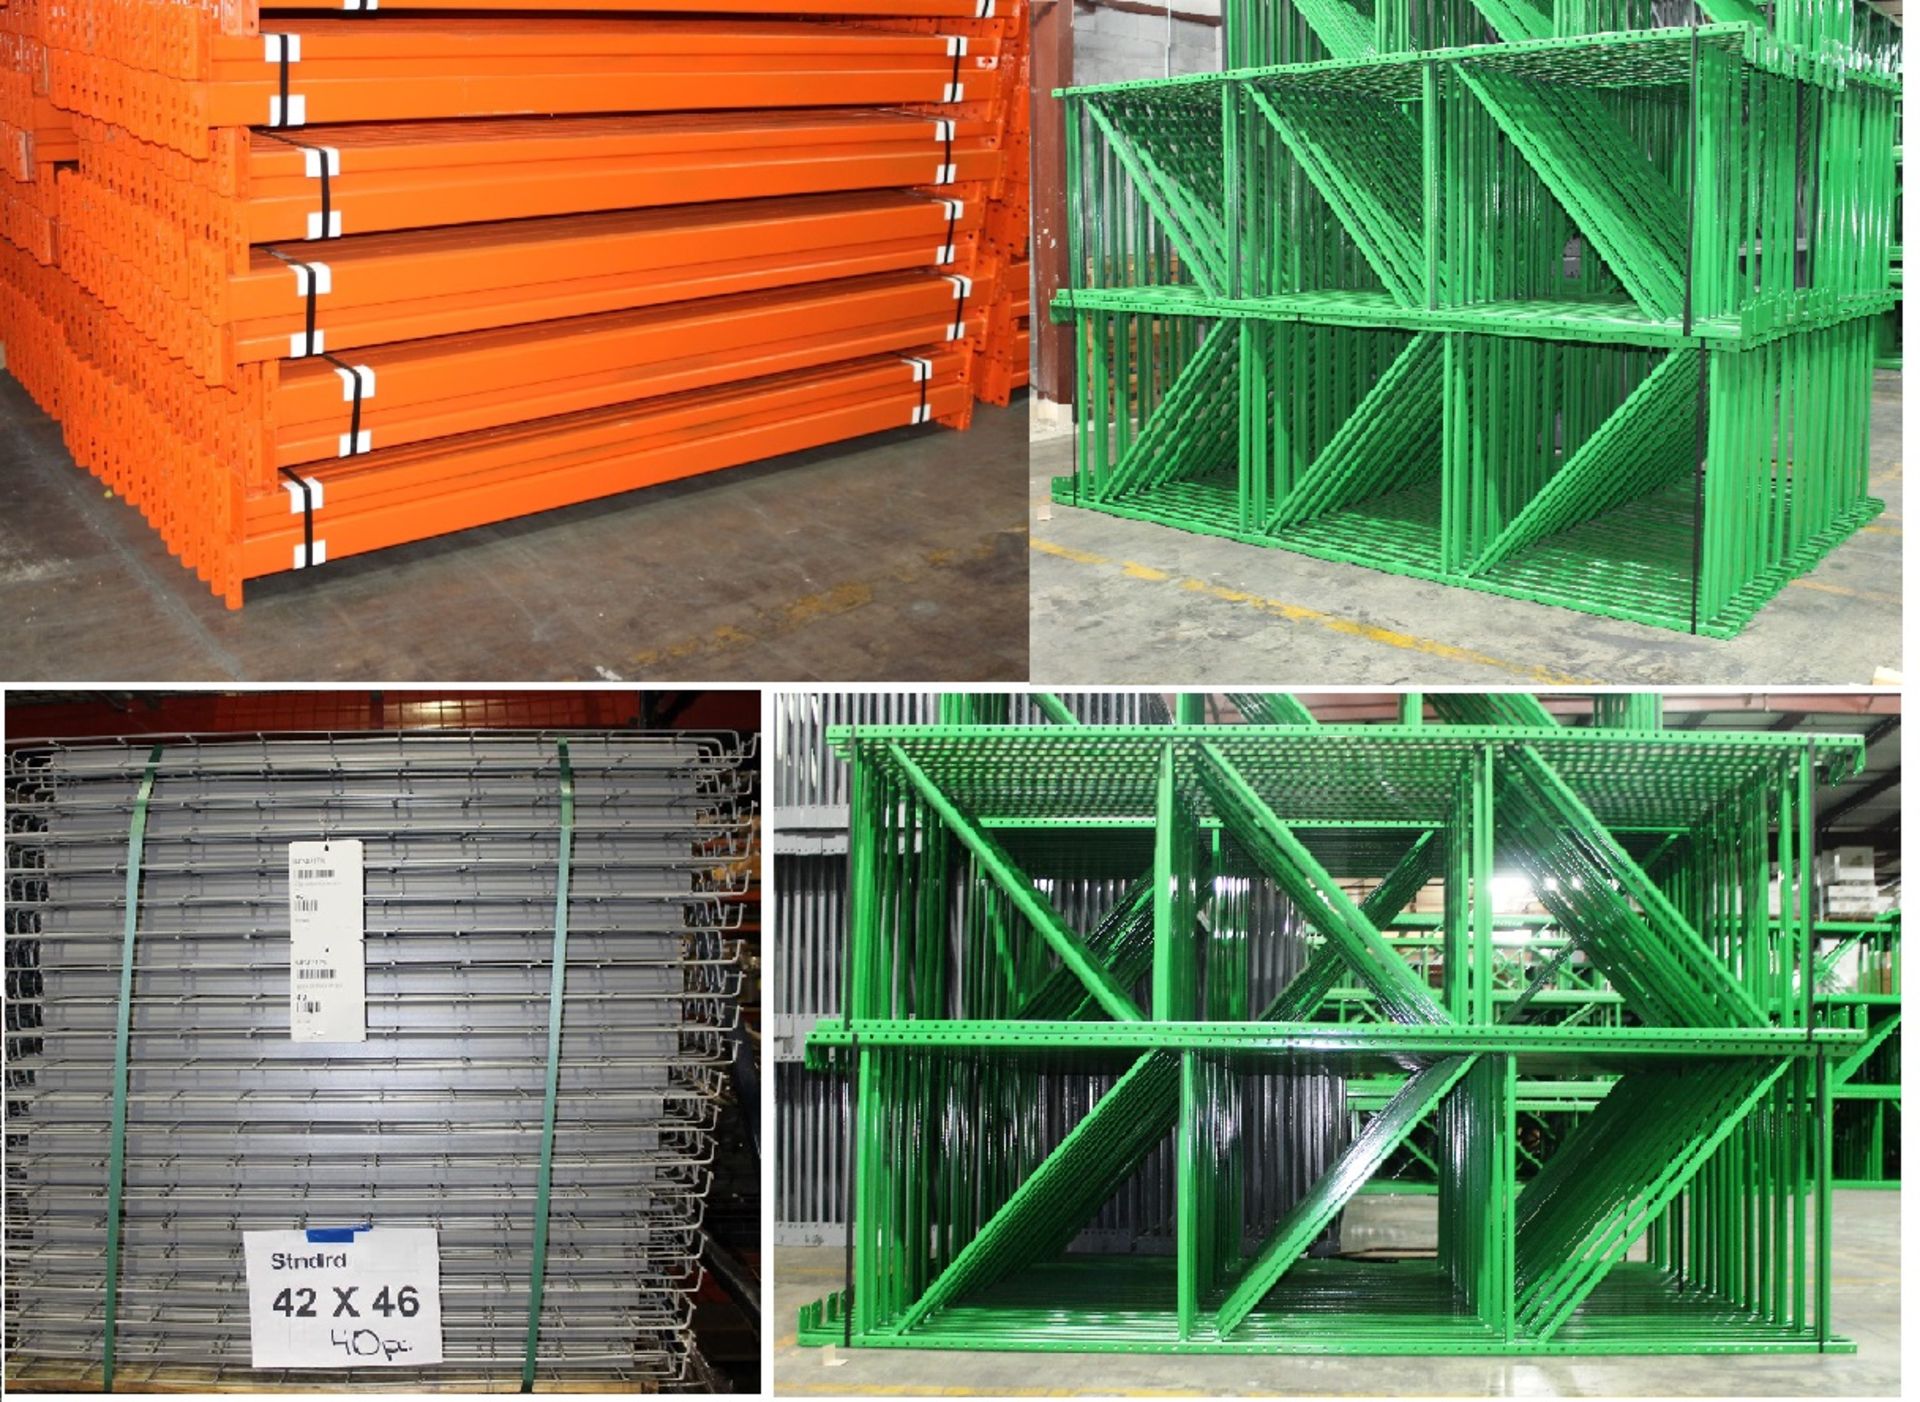 LIKE NEW TEAR DROP STYLE PALLET RACK WITH WIRE DECKING. SIZE:  144"H X 96"L X 42"D, FULL TRUCK LOAD